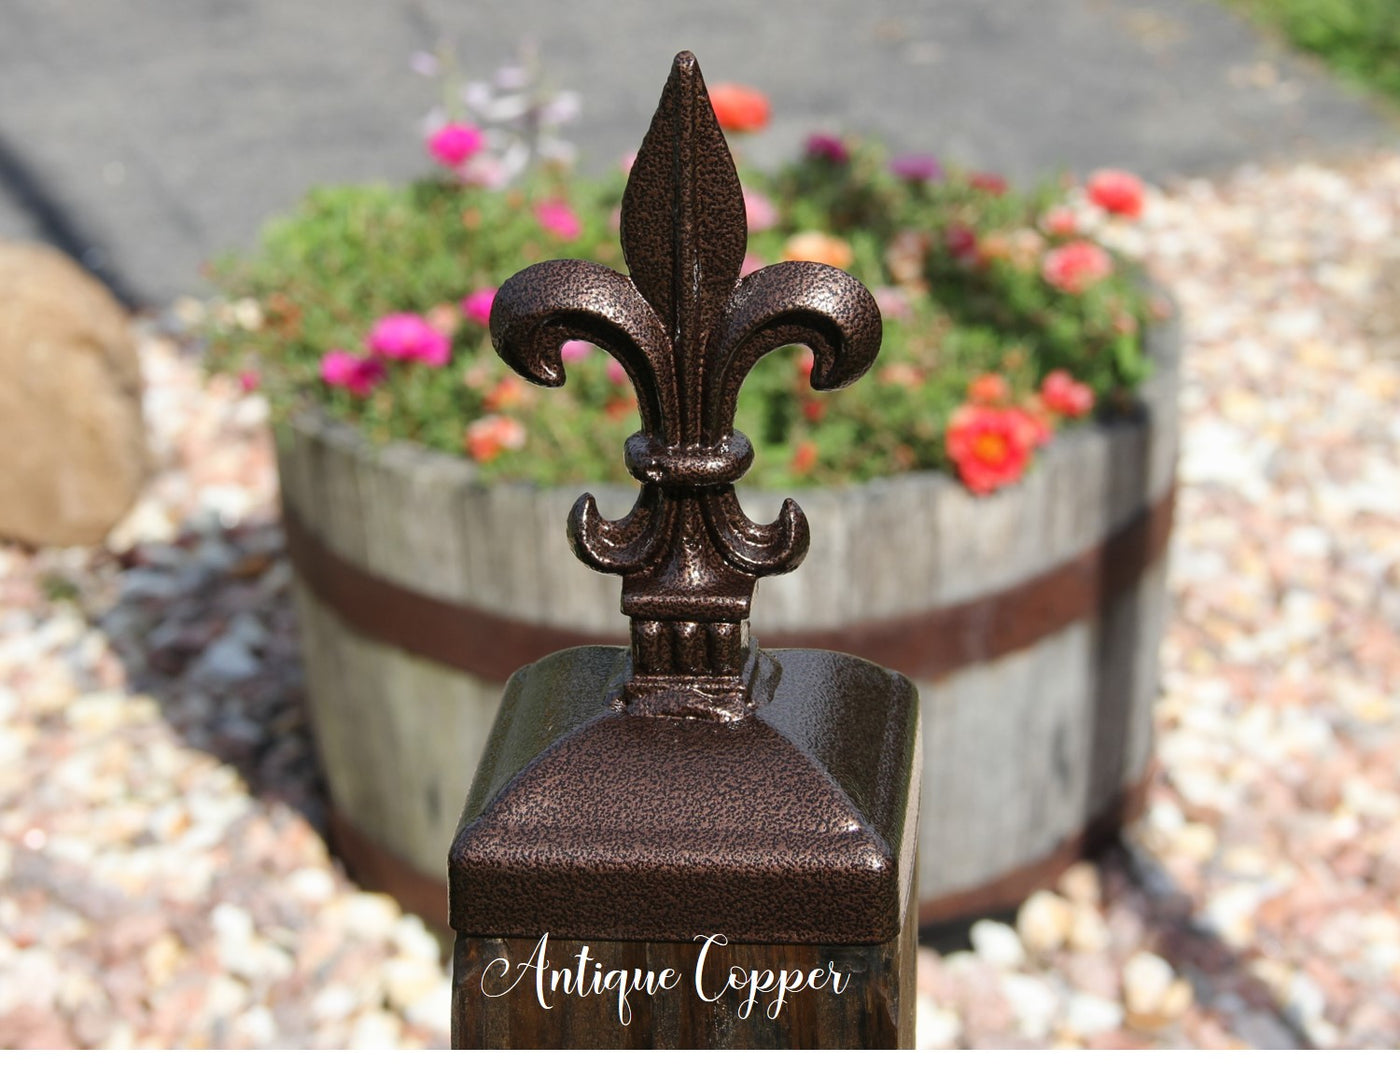 4x4 Fleur-De-Lis Fence Post Cap - Madison Iron and Wood - Post Cap - metal outdoor decor - Steel deocrations - american made products - veteran owned business products - fencing decorations - fencing supplies - custom wall decorations - personalized wall signs - steel - decorative post caps - steel post caps - metal post caps - brackets - structural brackets - home improvement - easter - easter decorations - easter gift - easter yard decor